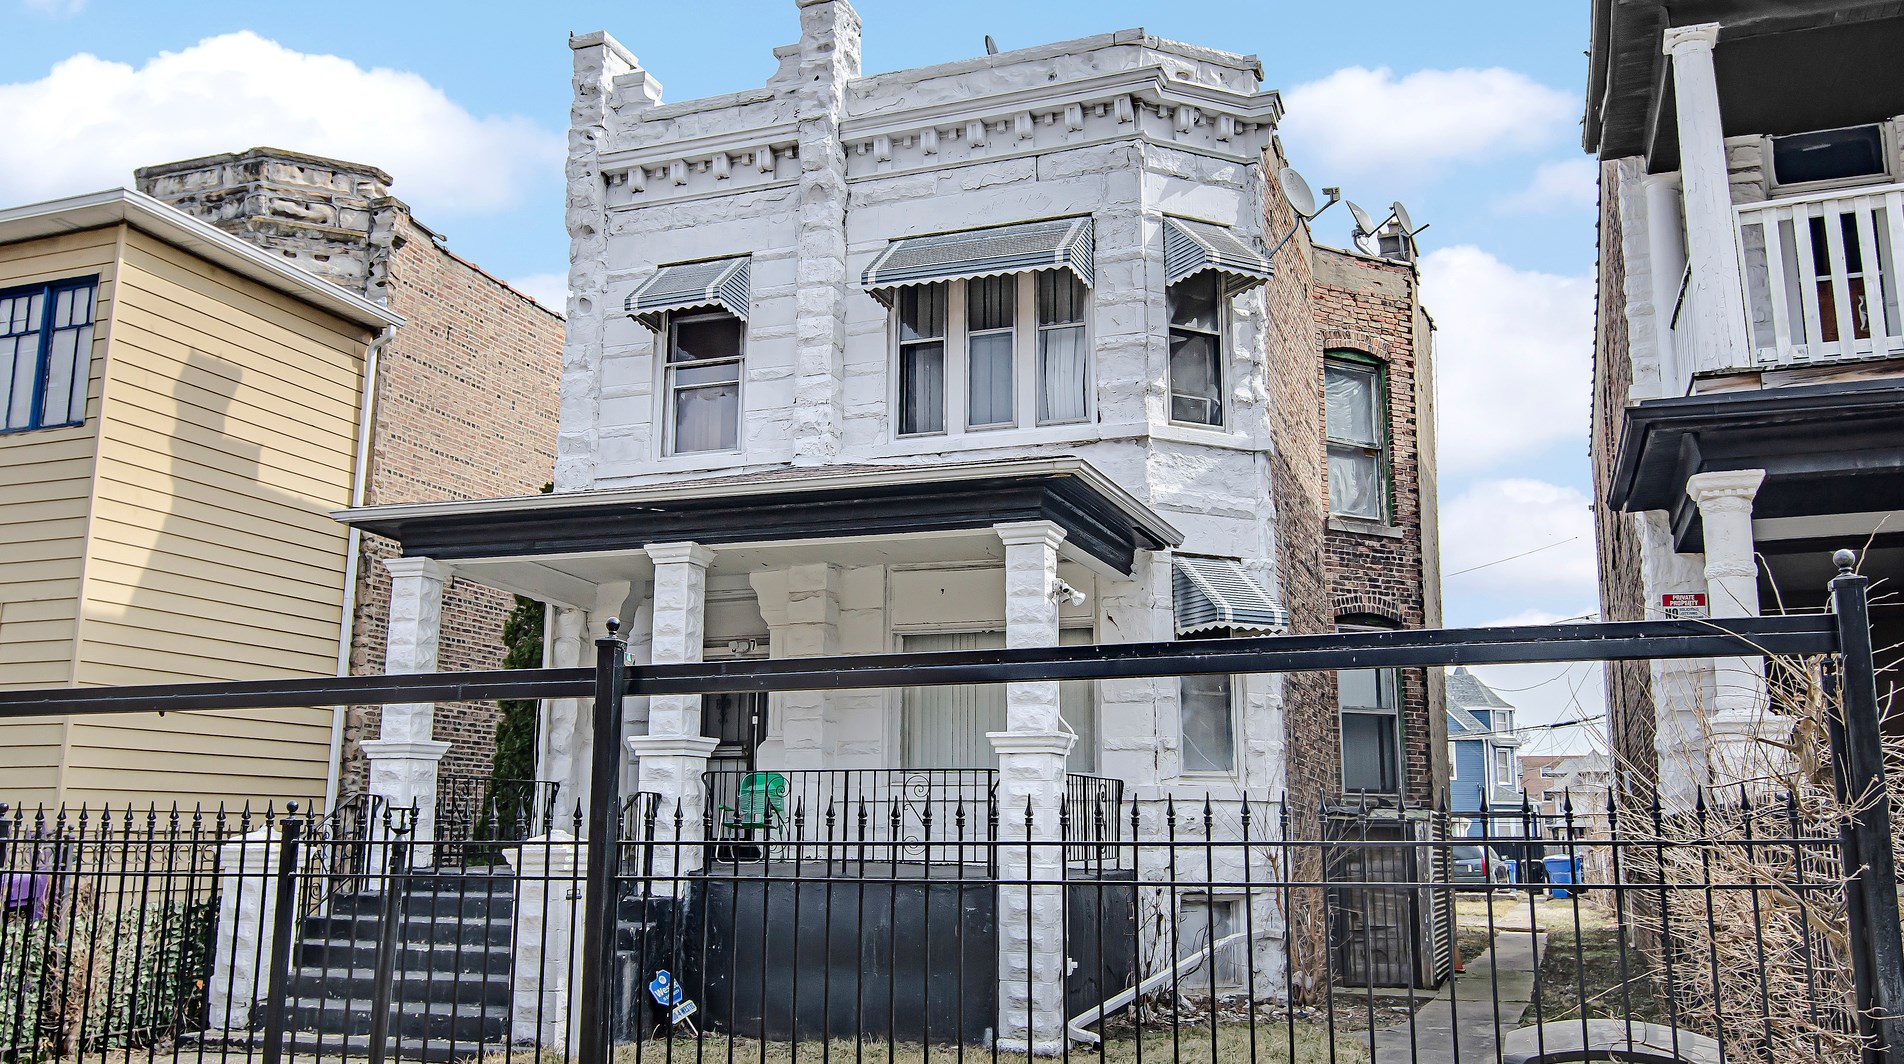 37 Waller Ave, Chicago, IL 60644